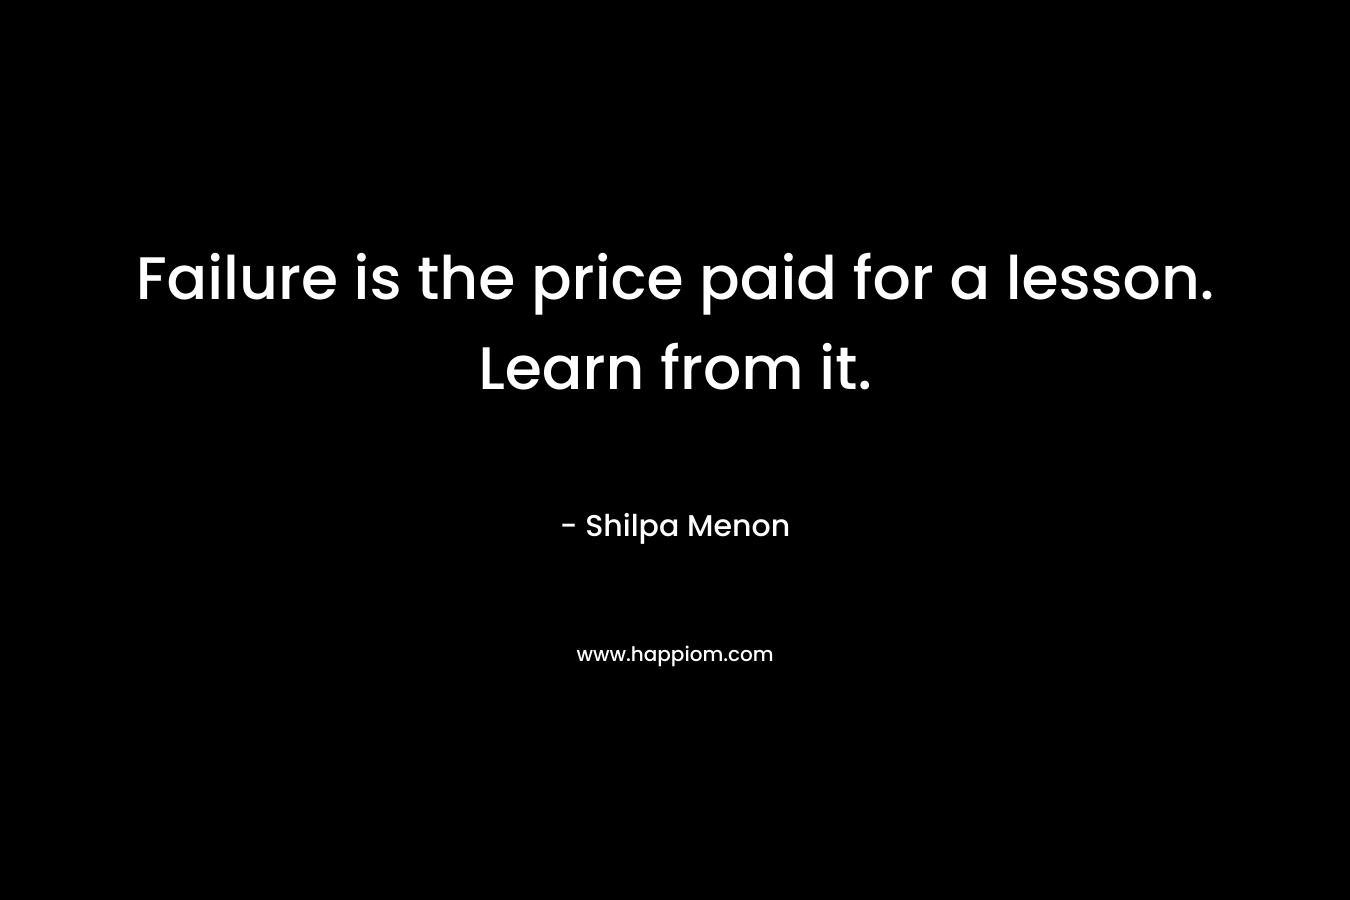 Failure is the price paid for a lesson. Learn from it. – Shilpa Menon